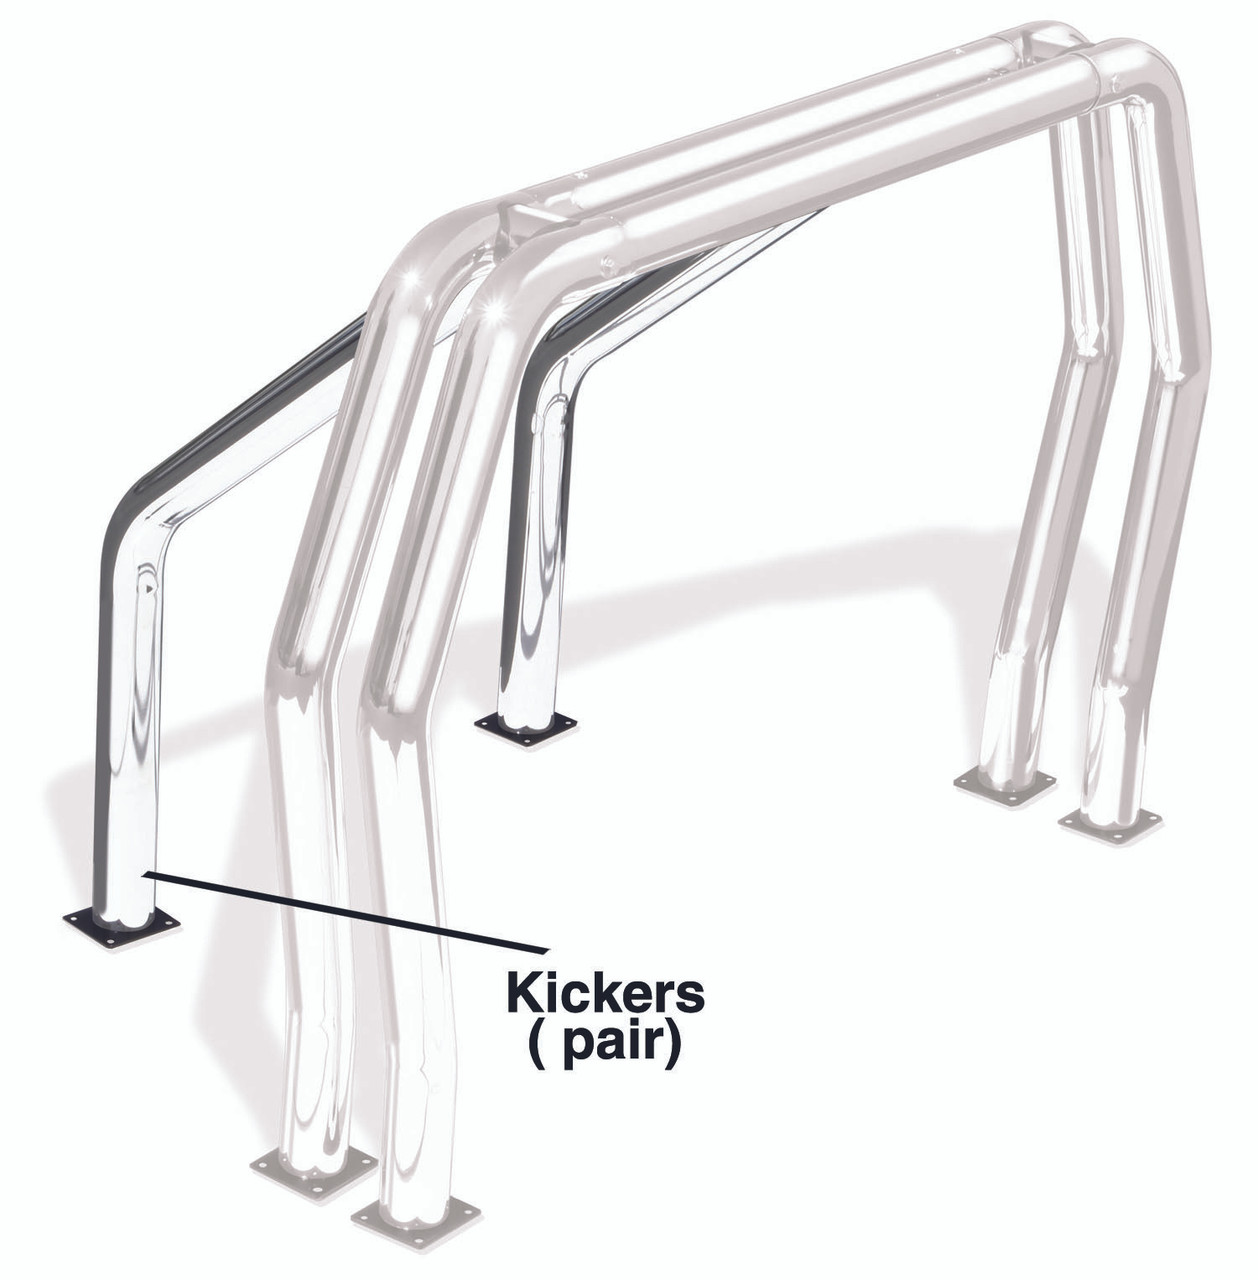 Go Rhino 9370PS Universal Kickers, RHINO Bed Bar, Roll Bar, Polished Stainless Steel, Mounting Kit Included